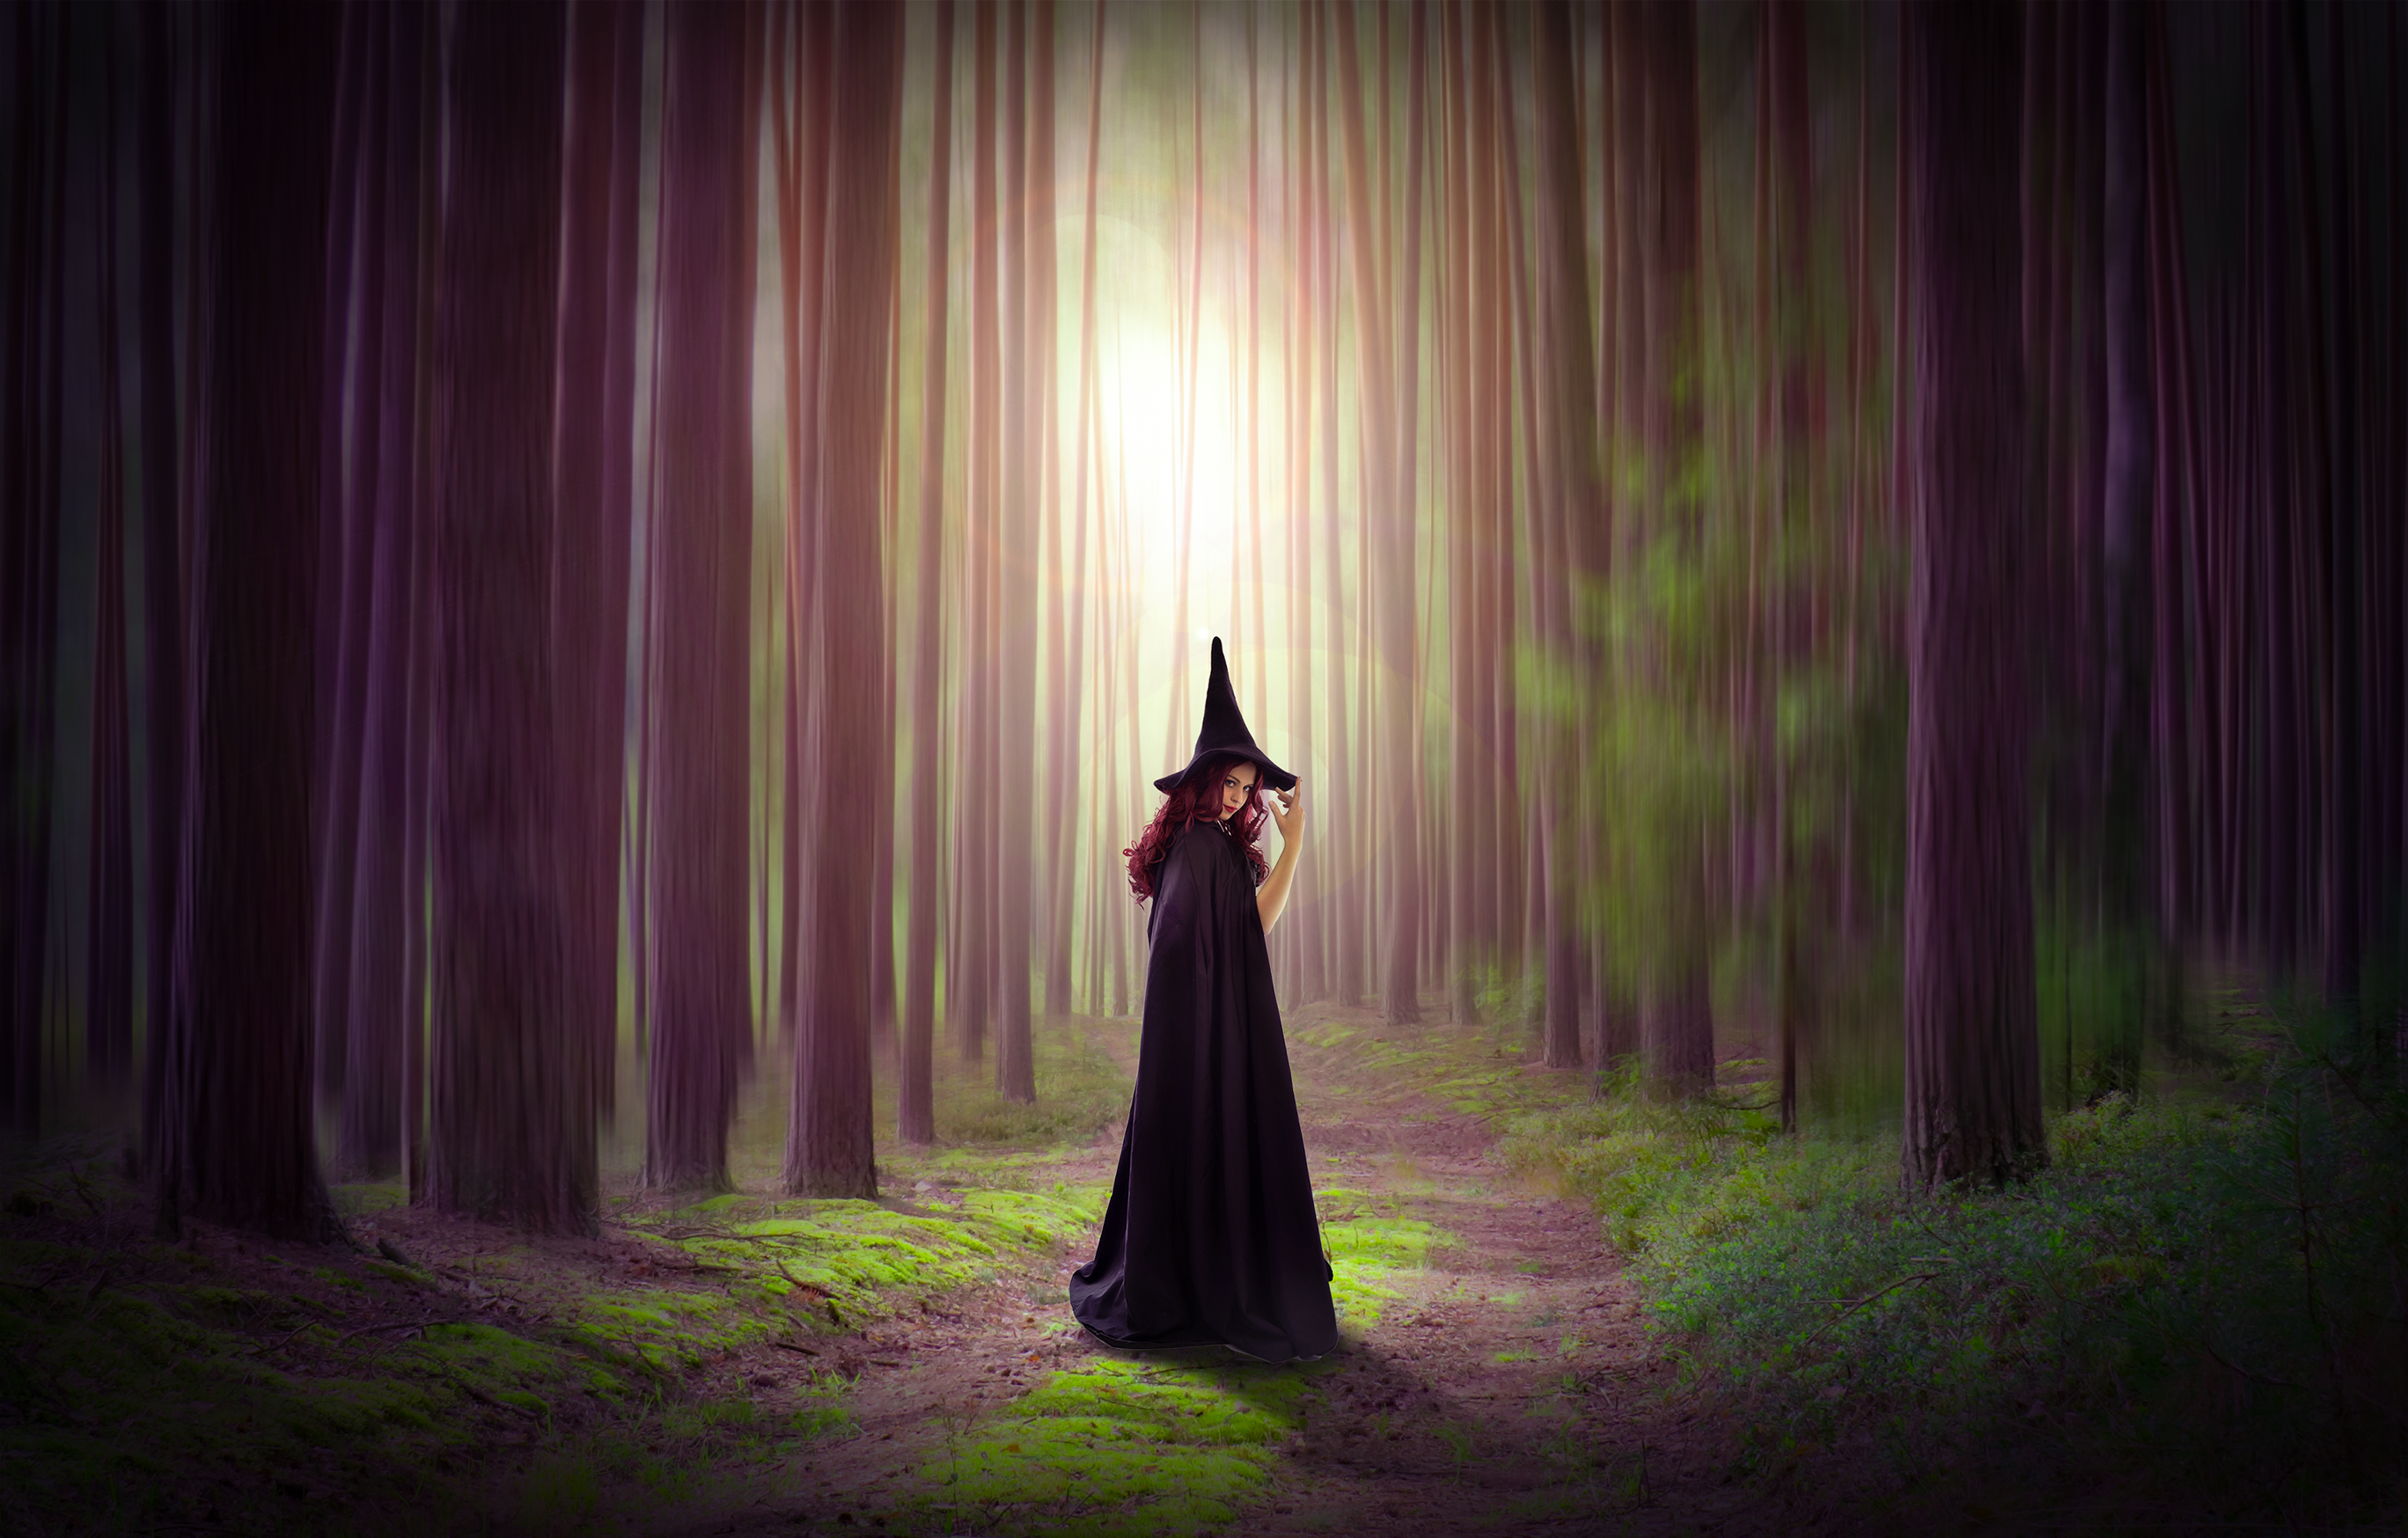 General 2736x1748 photoshopped photo manipulation forest trees green magenta witch witch hat dirt road digital art